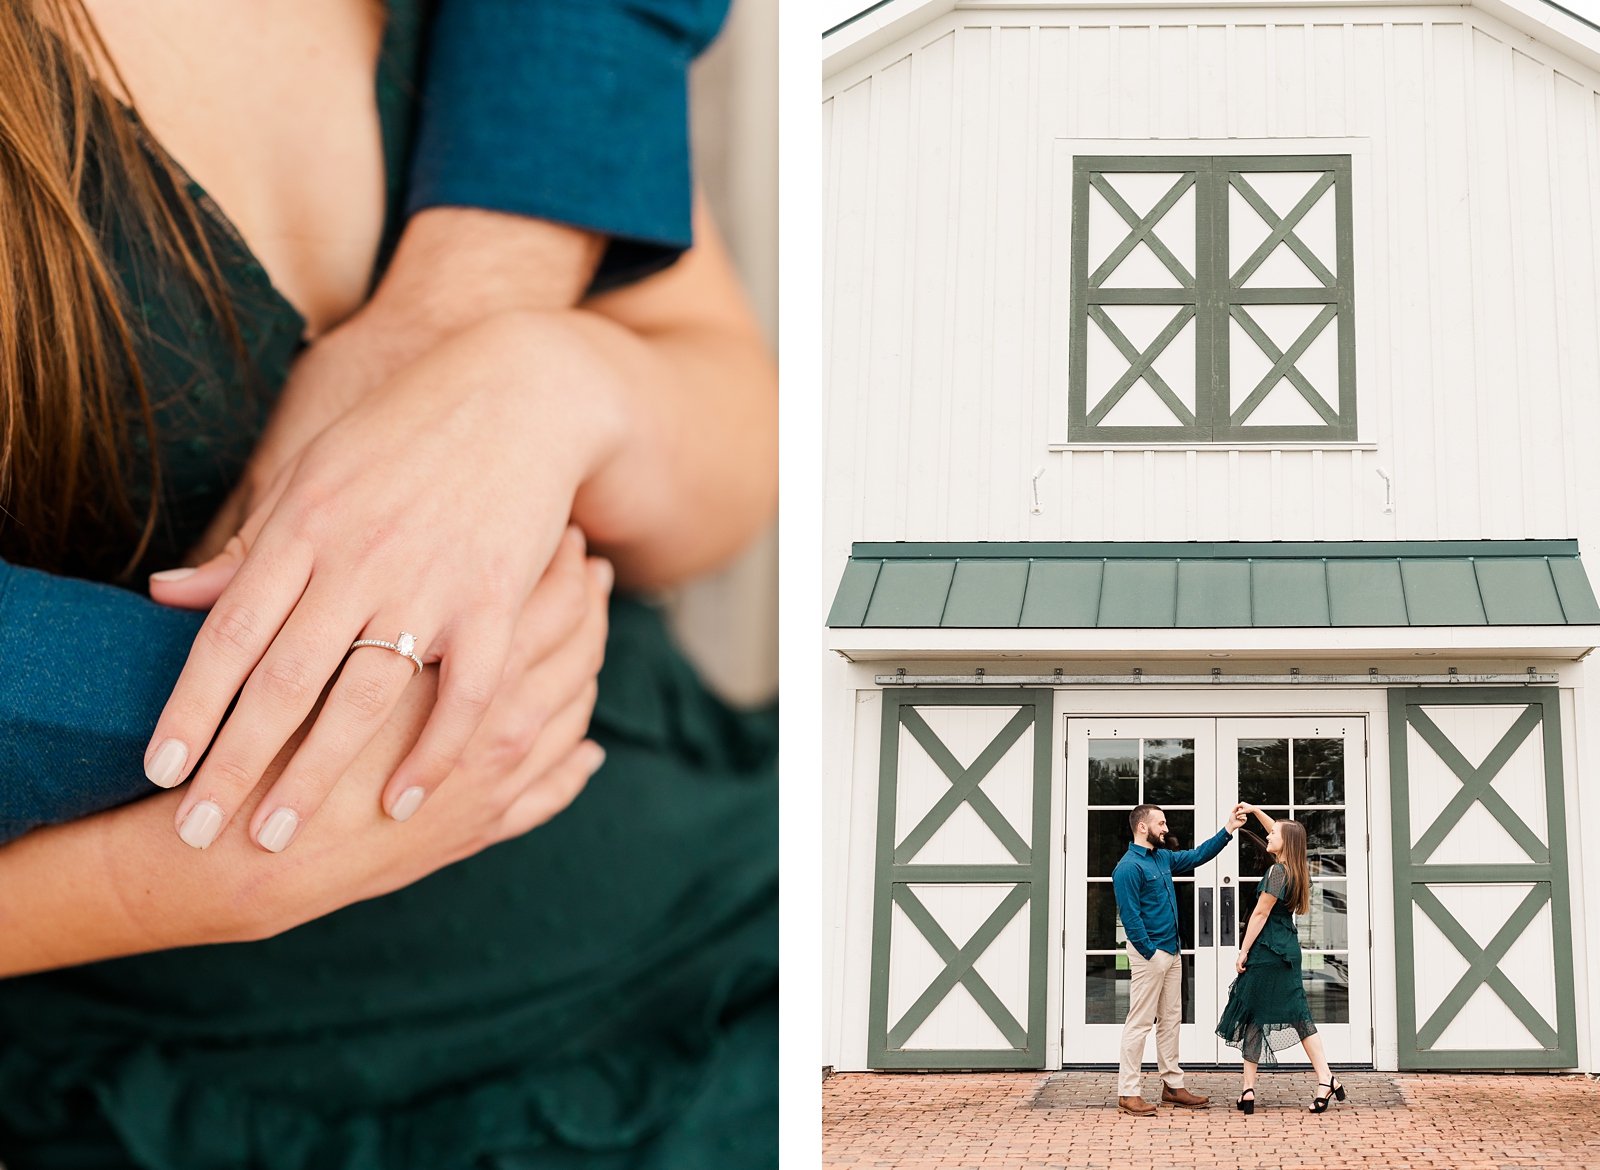 King Family Vineyards Engagement Session with Green Dress. Virginia Wedding Photographer Kailey Brianne Photography 